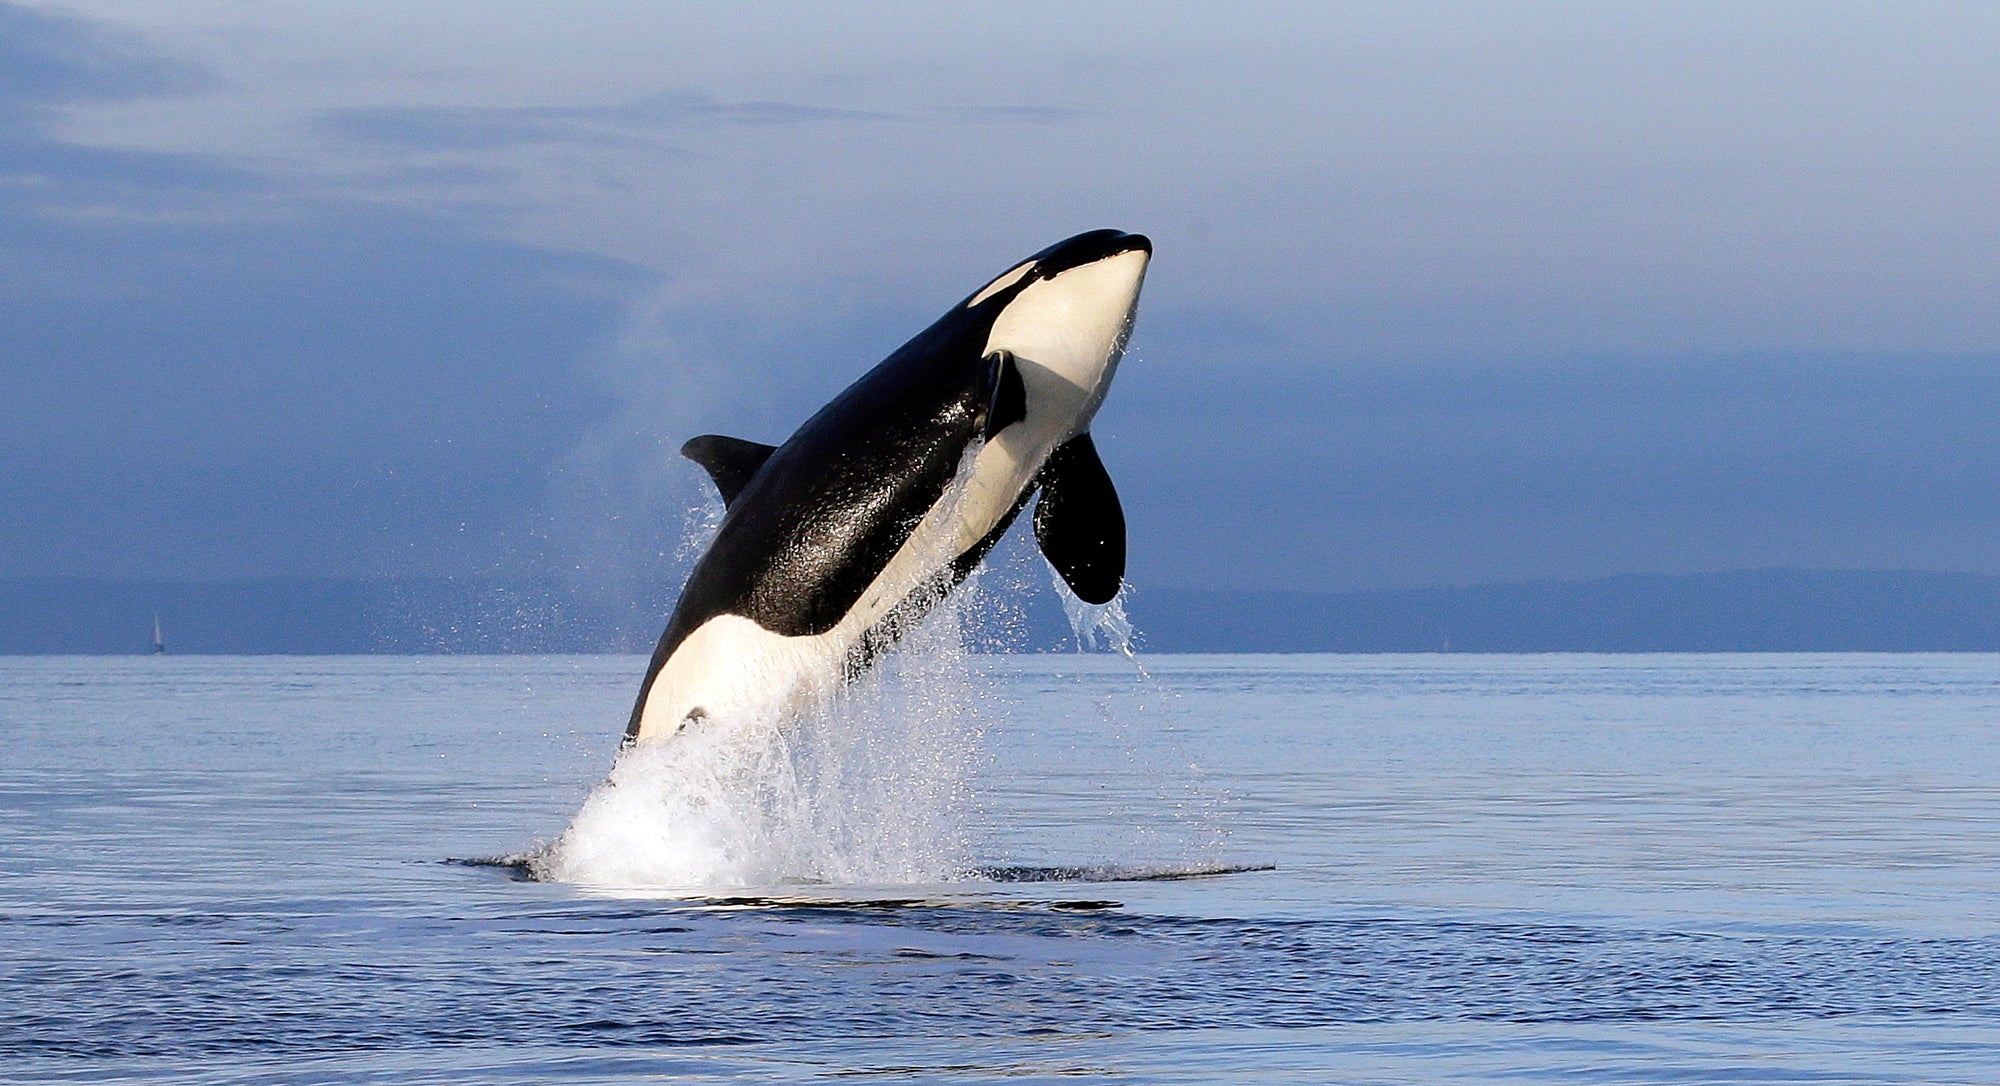 The orca is almost completely out of the water, against a blue background